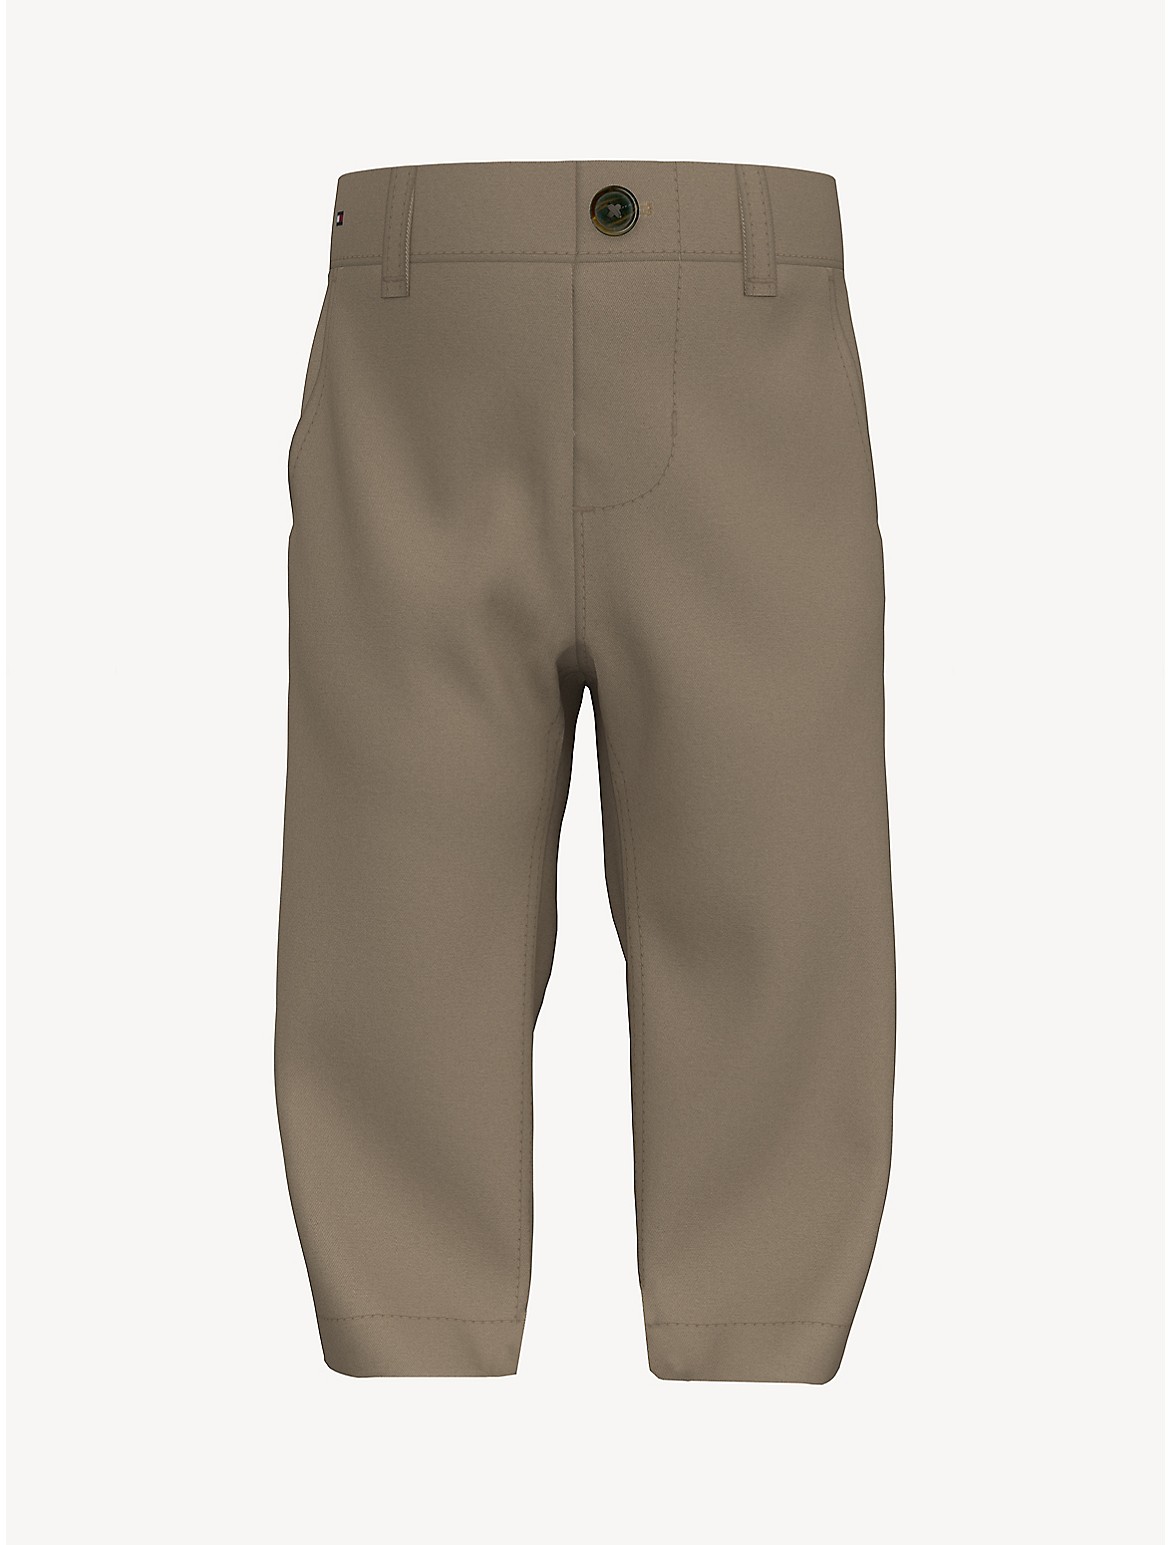 Tommy Hilfiger Boys' Babies' Solid Chino - Brown - 18M